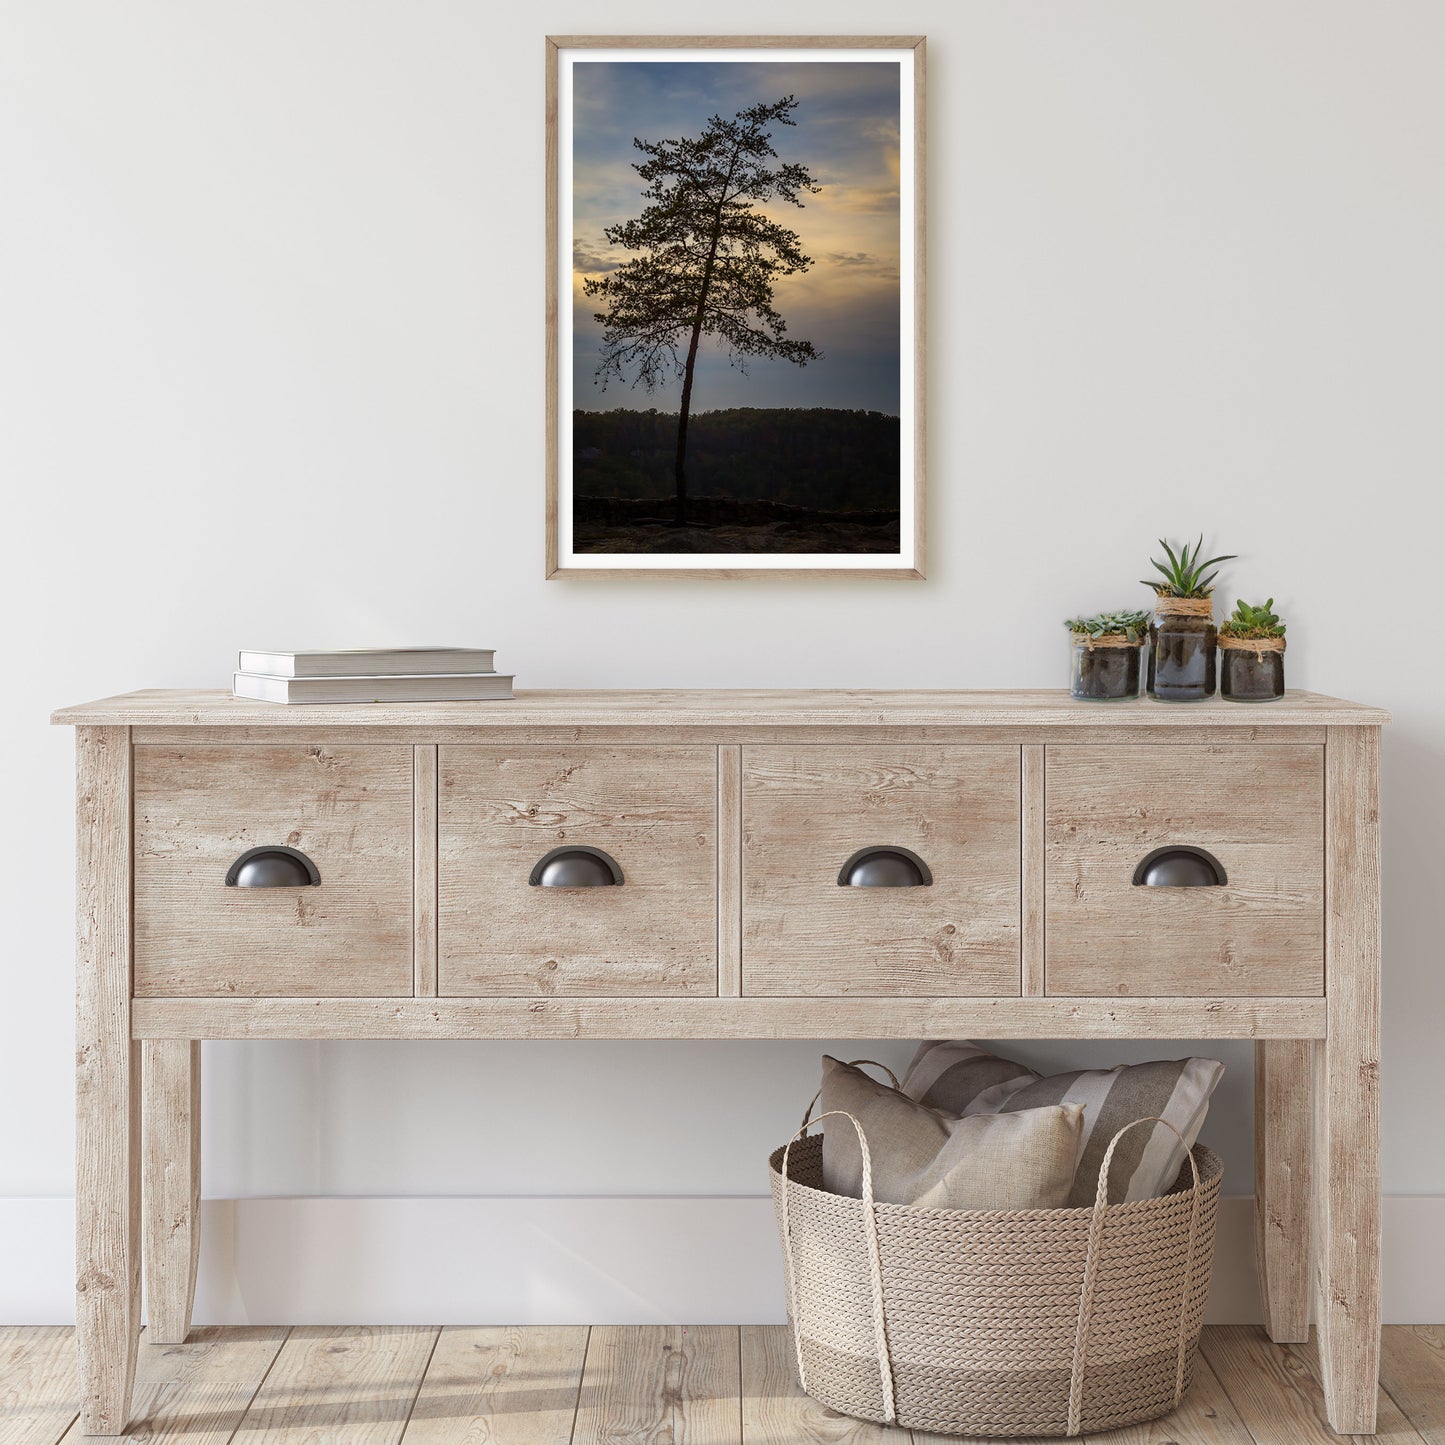 A captivating nature print capturing the silhouette of a single pine tree against the backdrop of an evening sky transitioning from daylight to dusk.